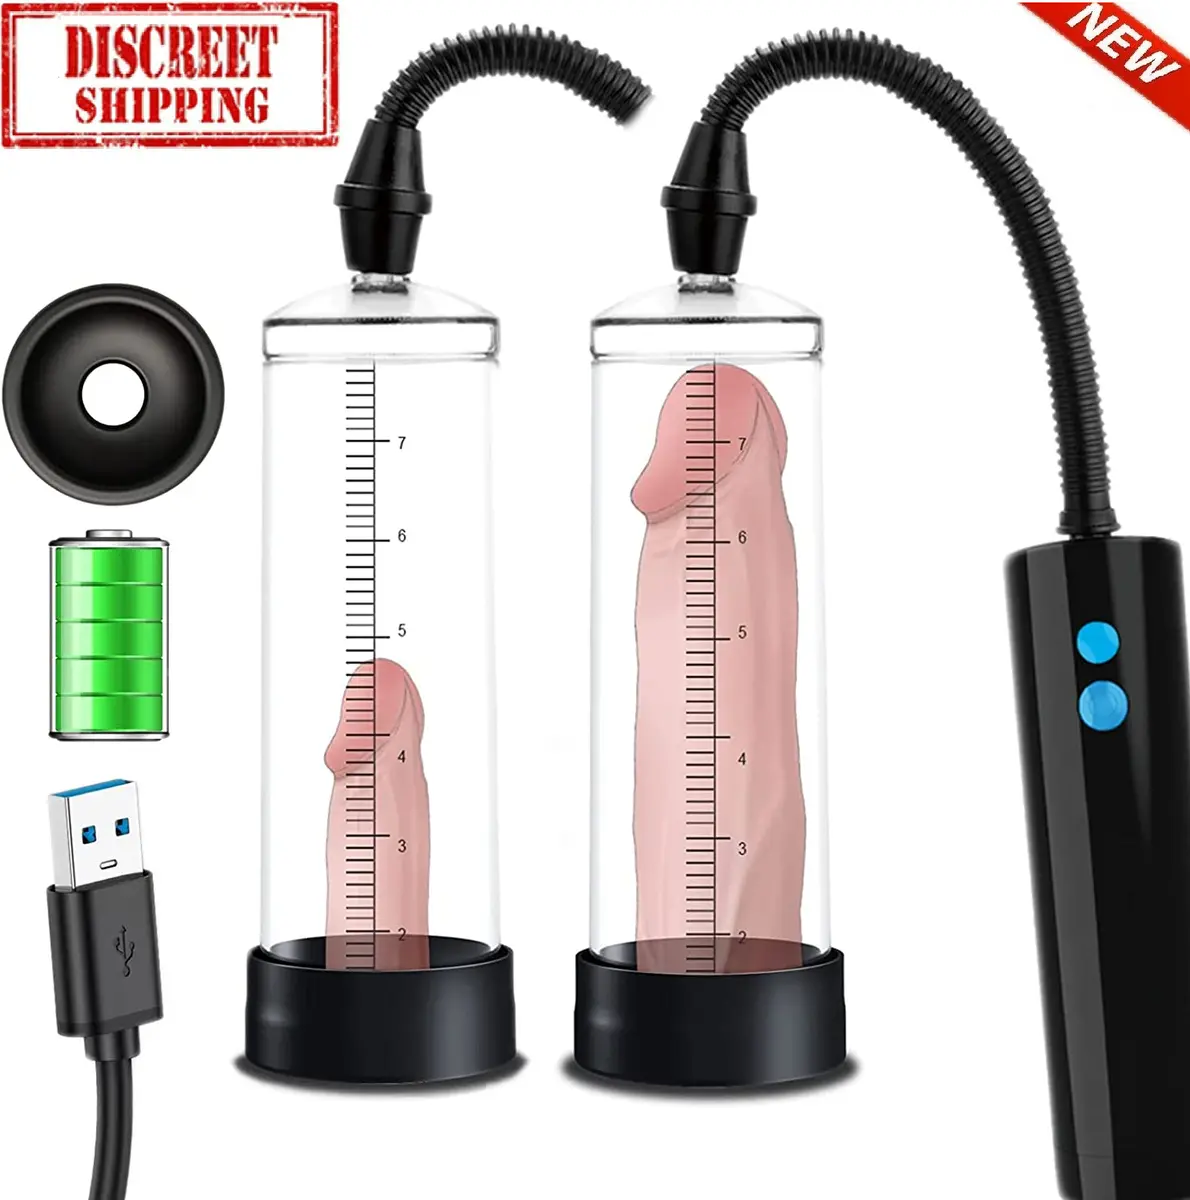 beverly griffiths recommends 10 Inch Penis Pump